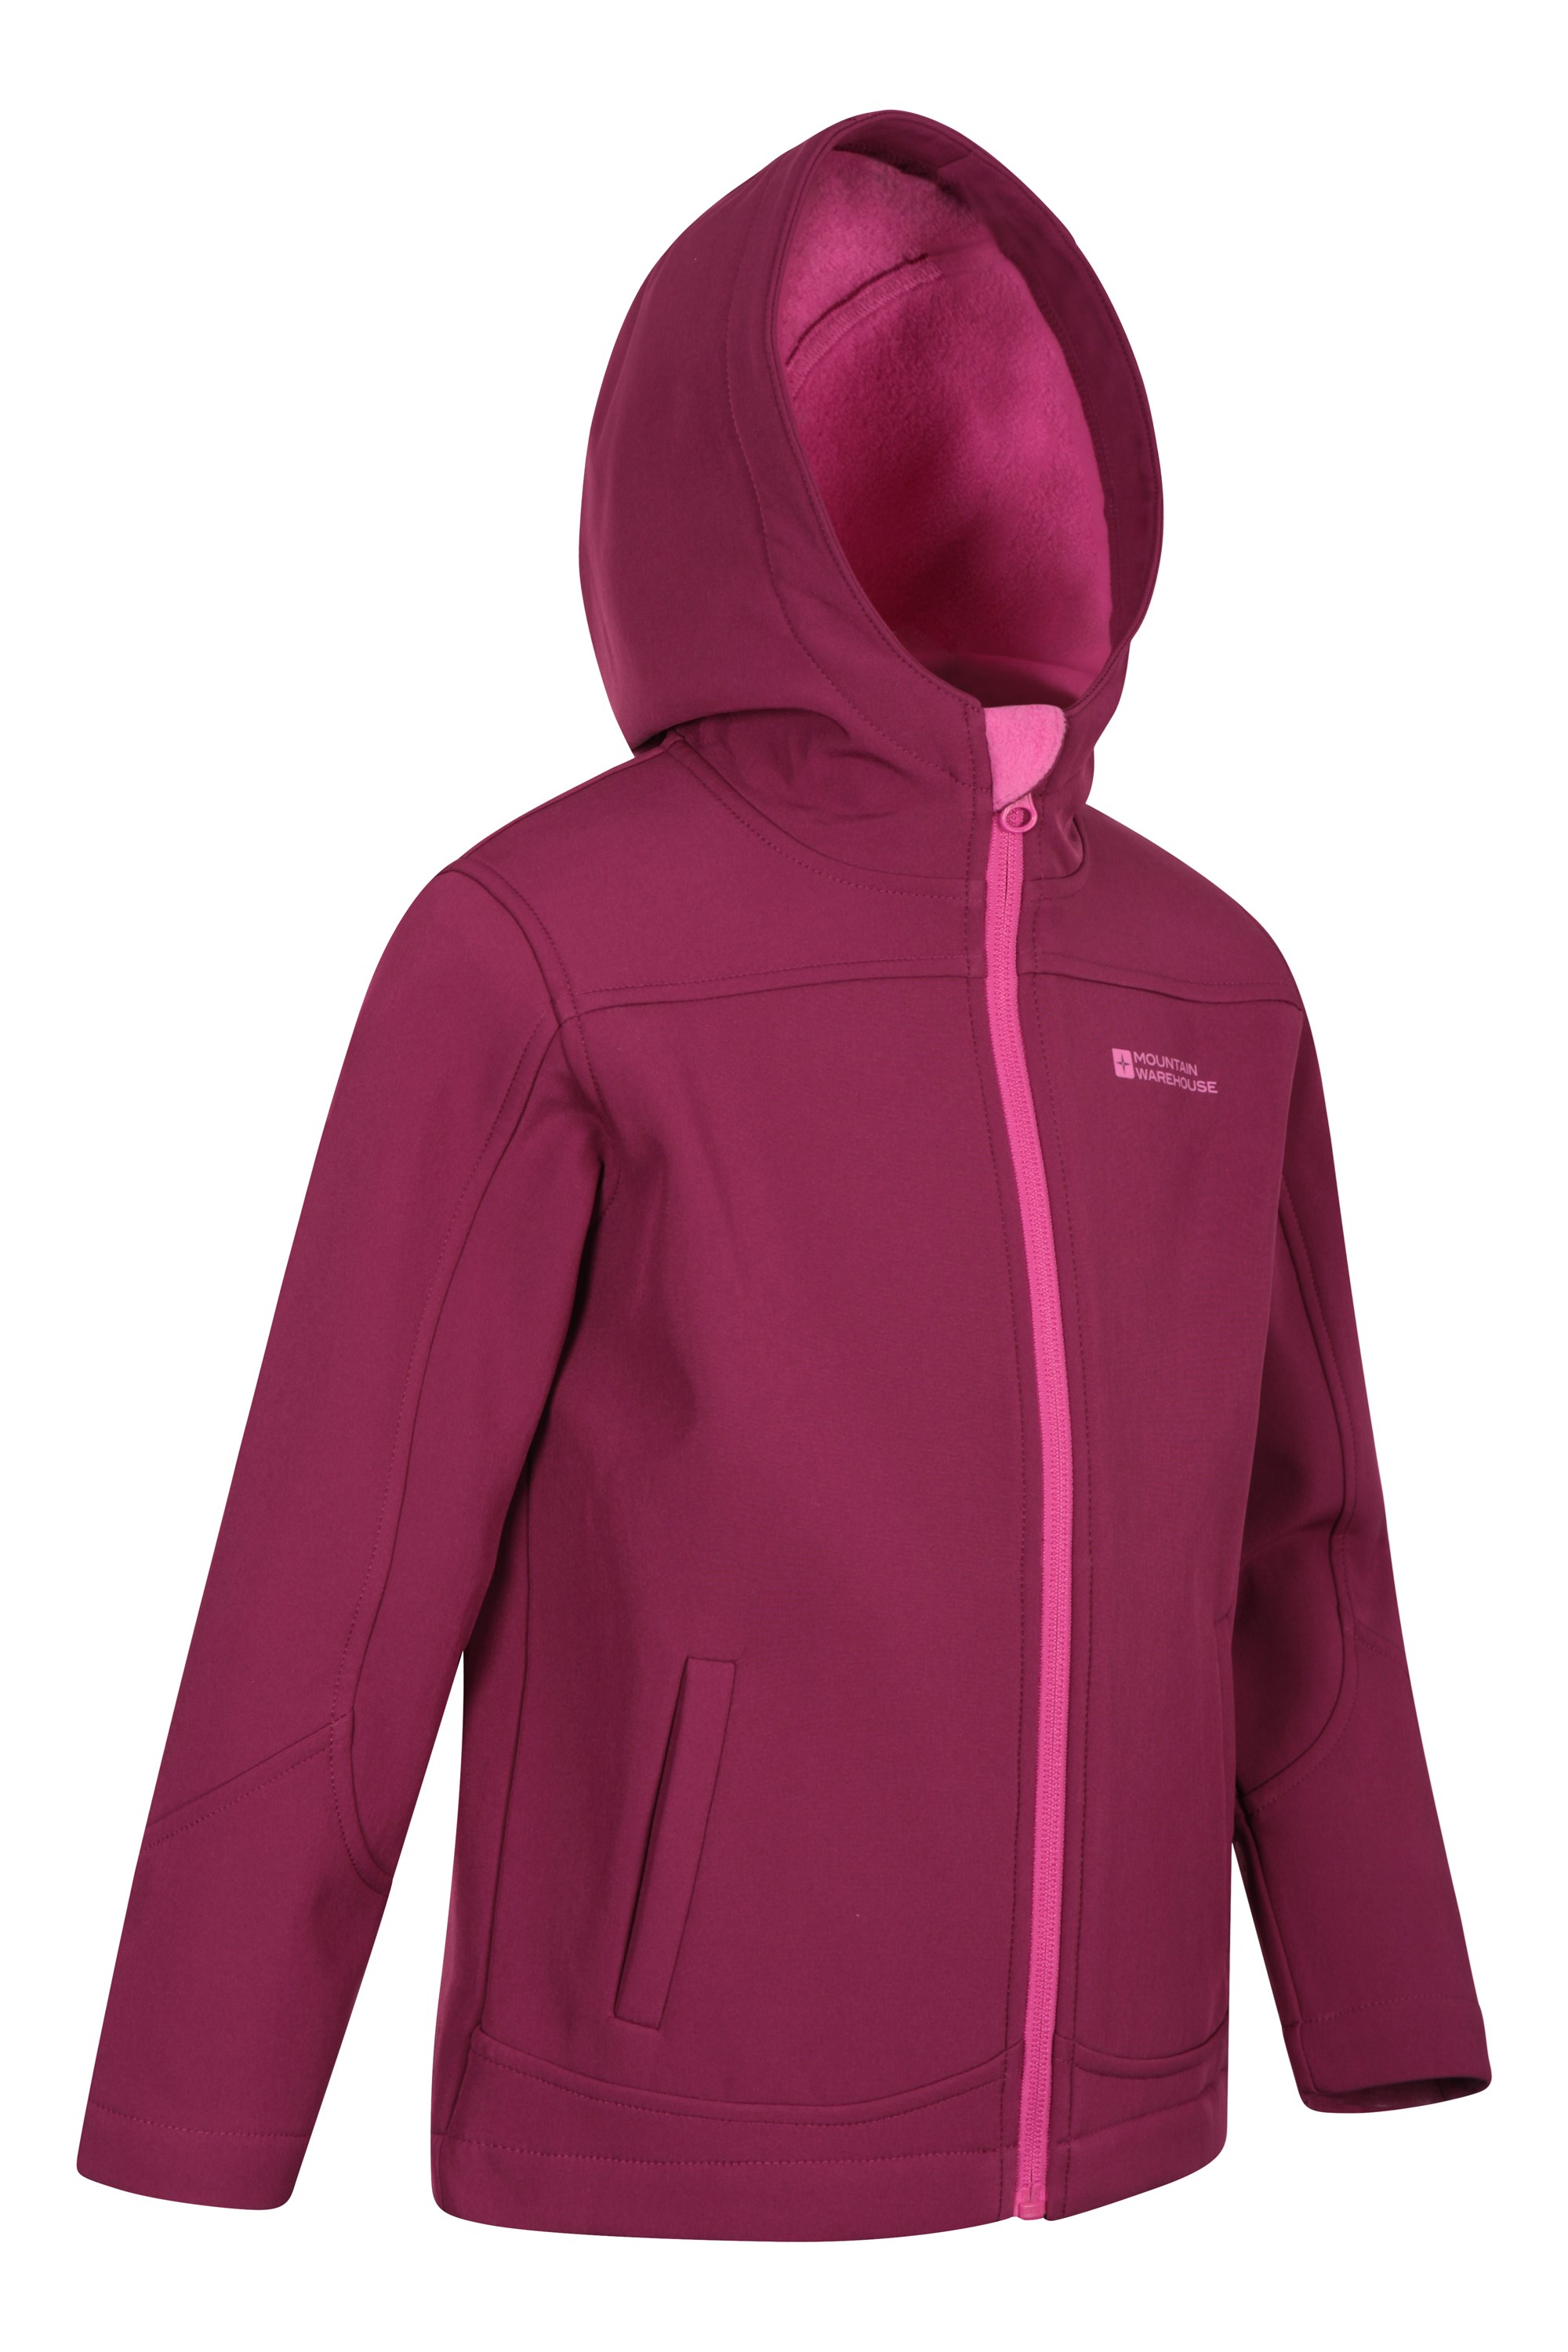 Mountain Warehouse Kids Water-Resistant Softshell Jacket Outdoors 